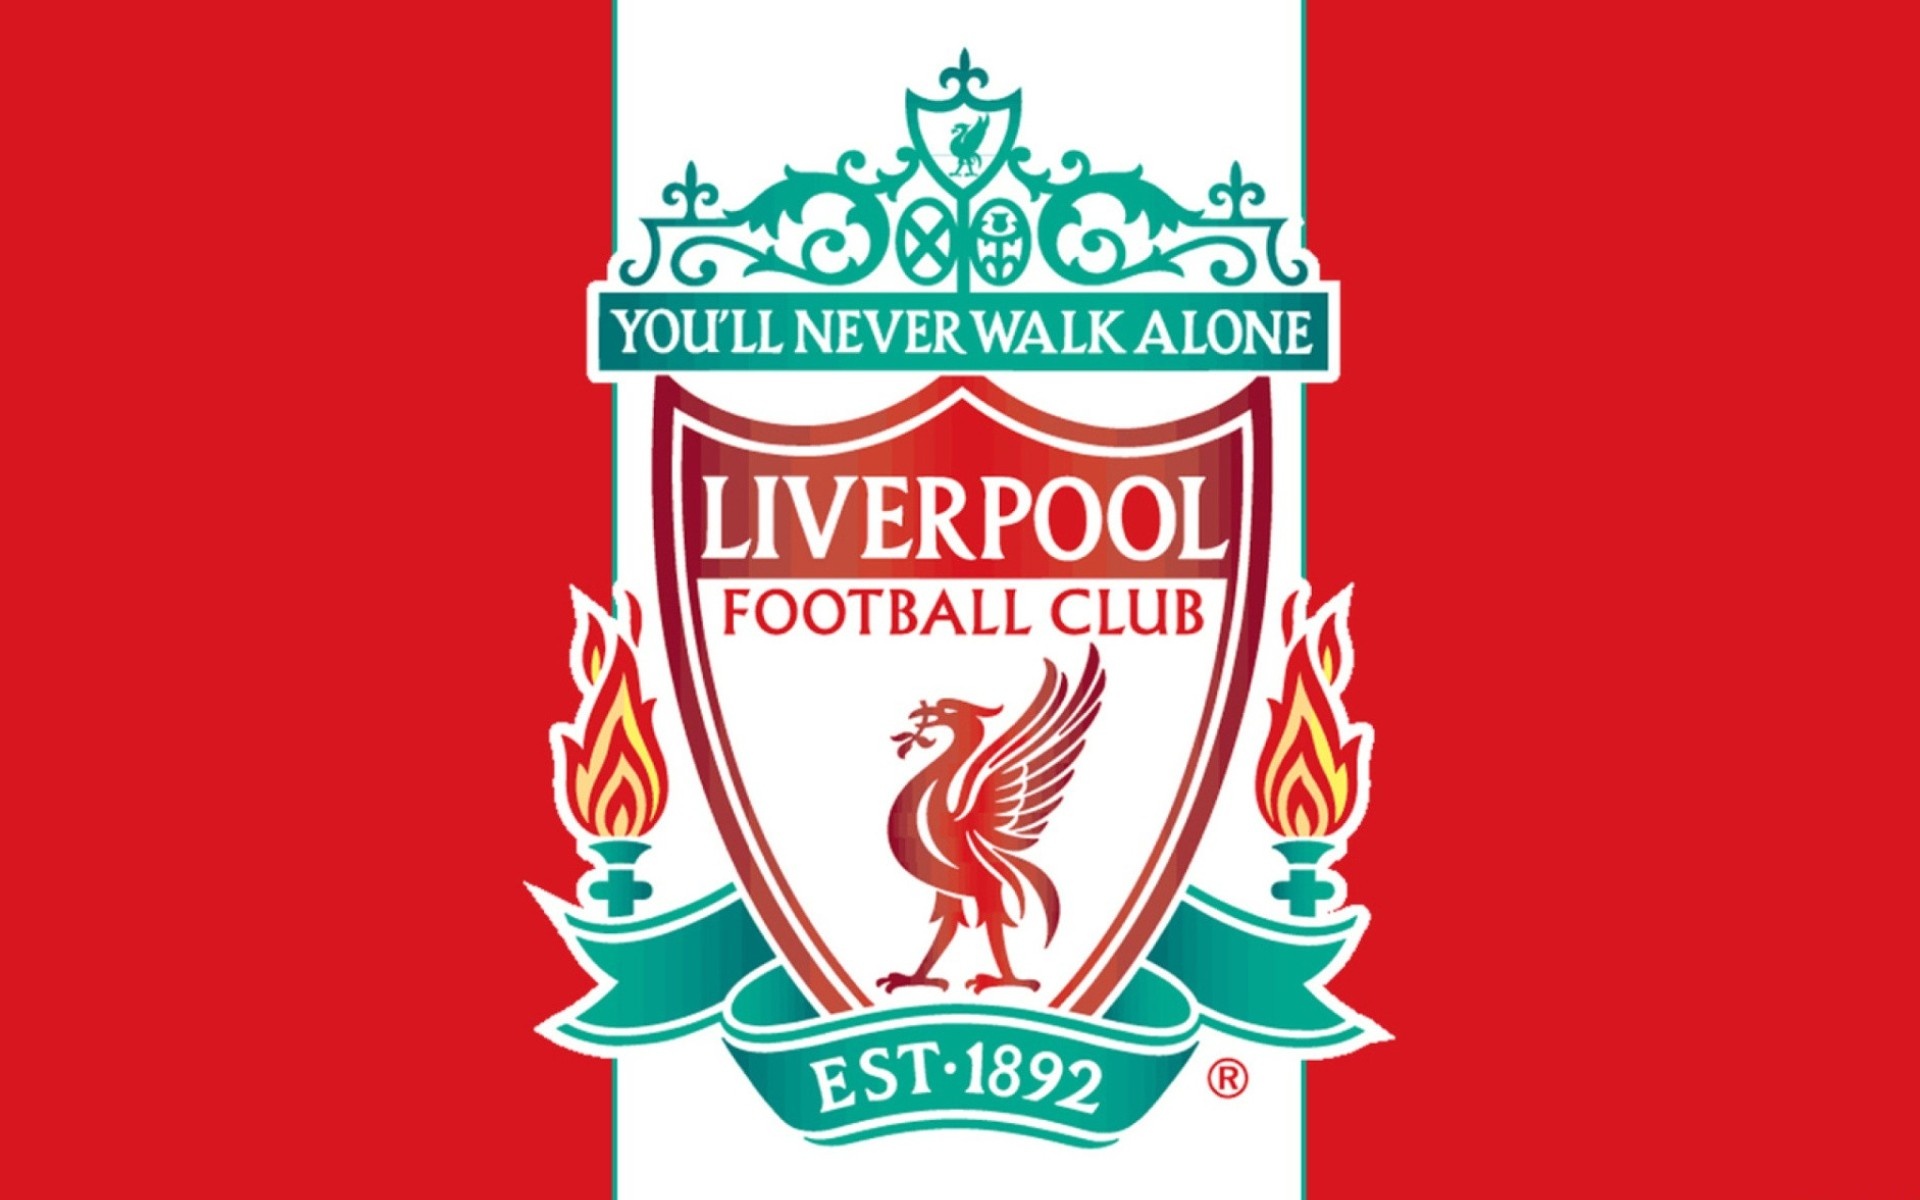 Liverpool Football Club: “You'll Never Walk Alone”, Official motto, Coat of arms. 1920x1200 HD Wallpaper.